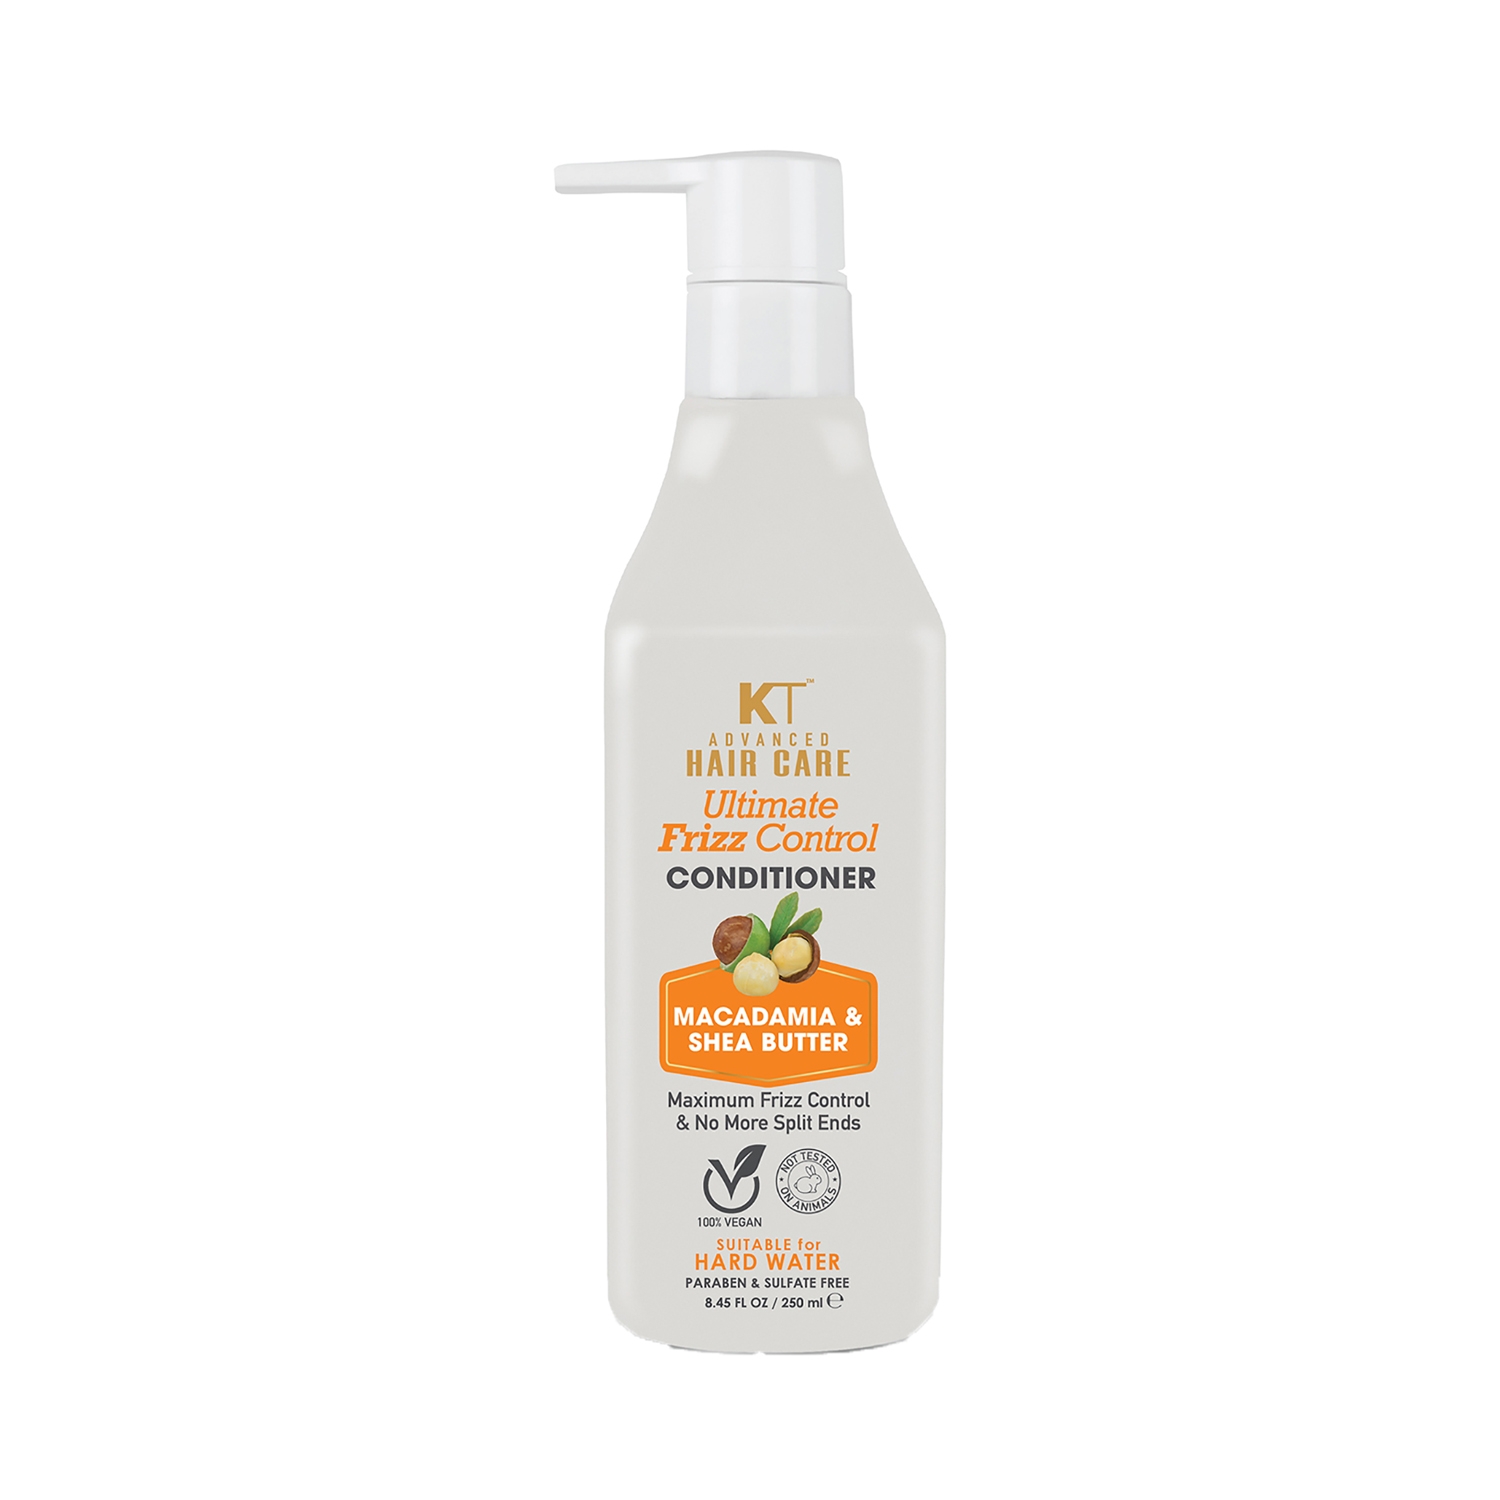 KT Professional | KT Professional Advanced Hair Care Ultimate Frizz Control Conditioner (250ml)